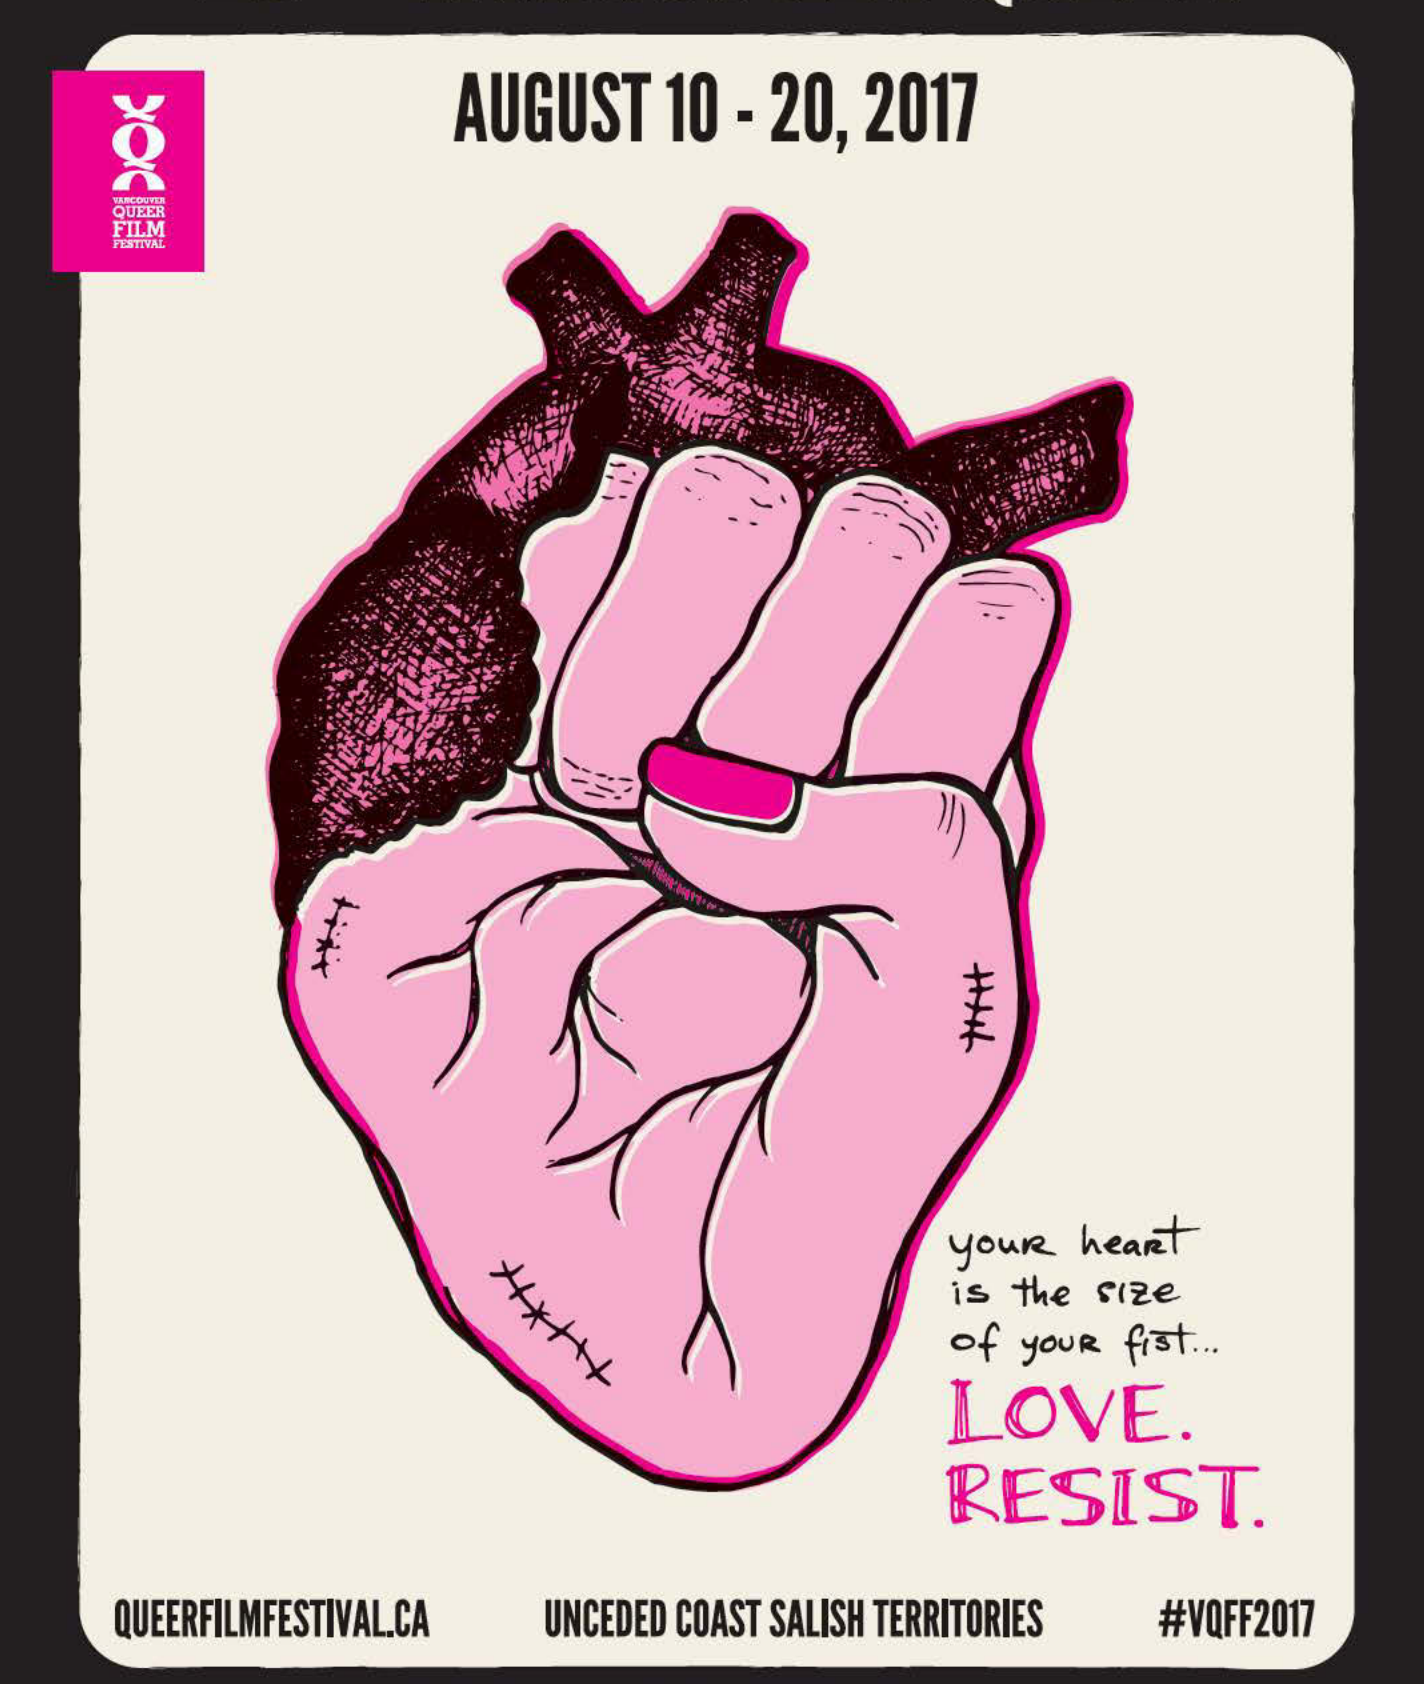 Your heart is the size of your fist - VQFF campaign poster